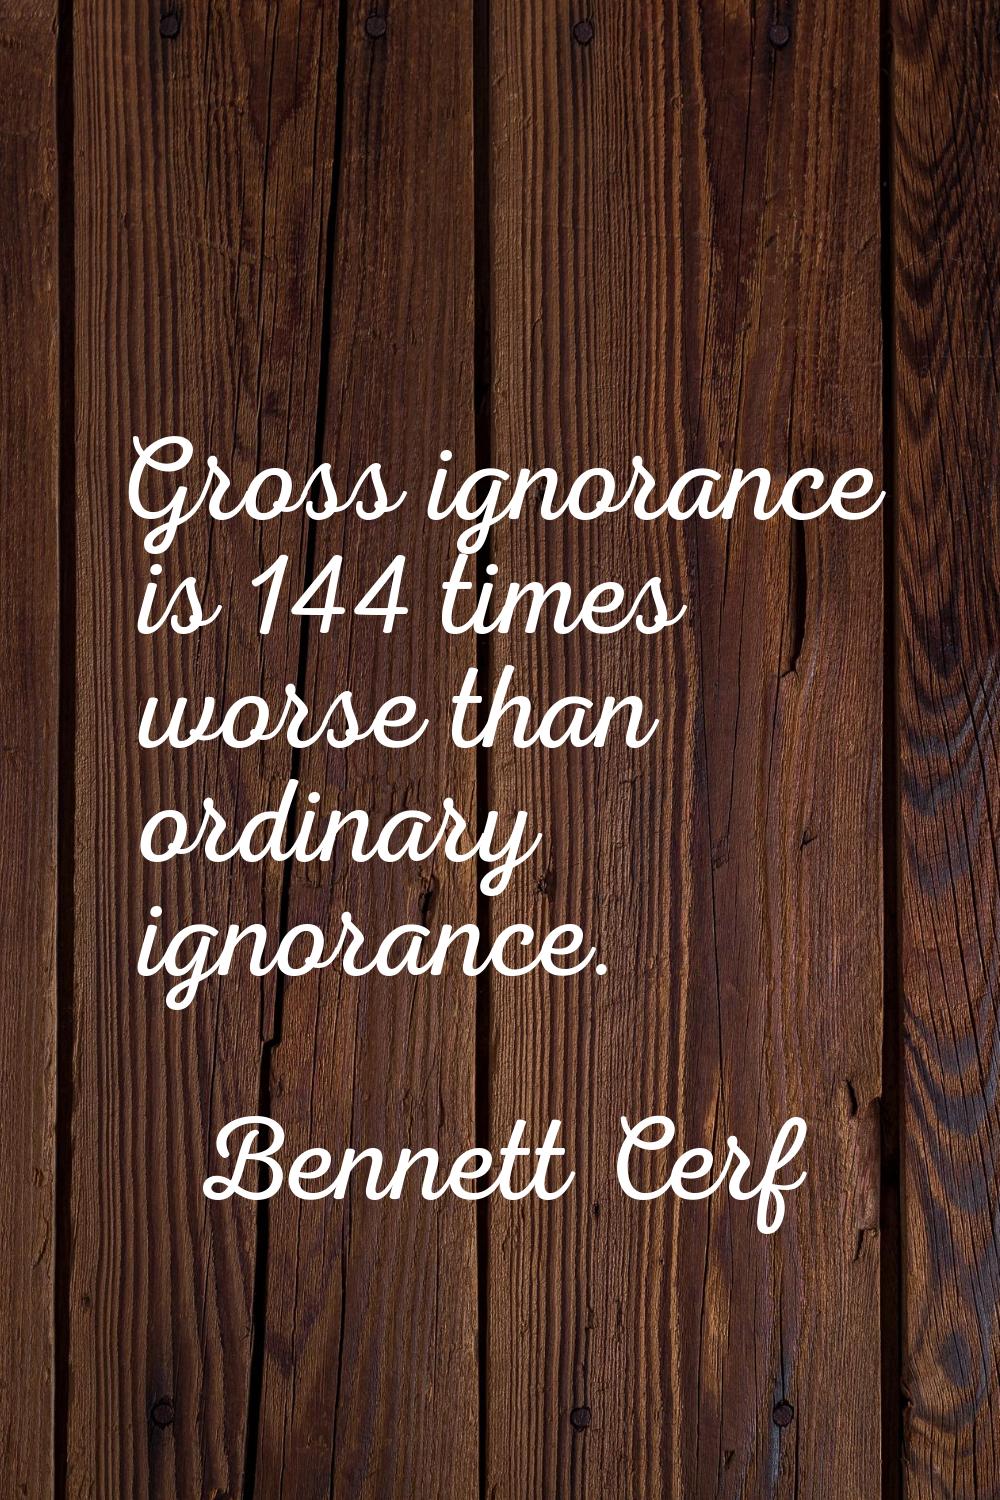 Gross ignorance is 144 times worse than ordinary ignorance.